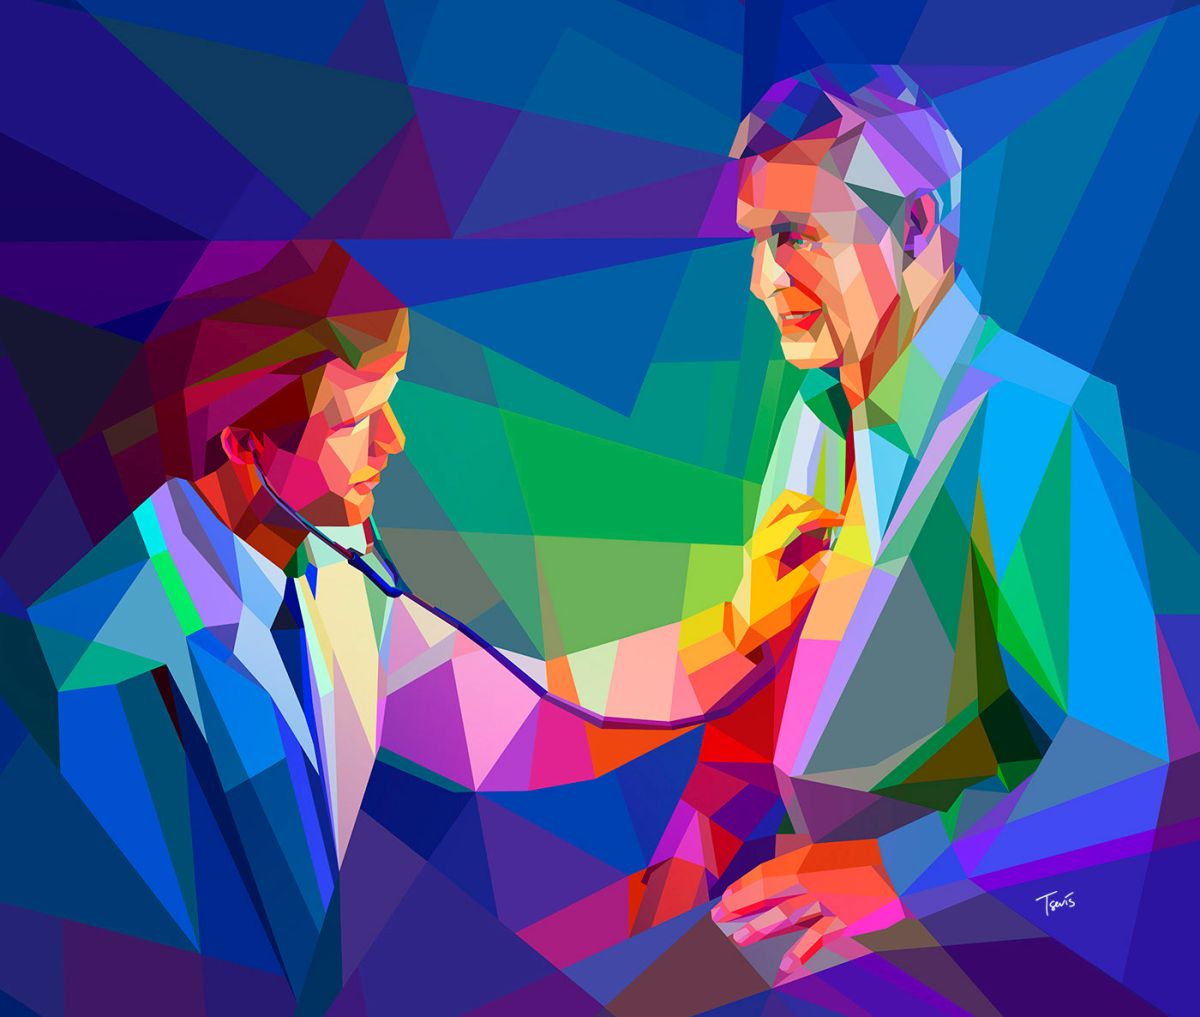 low poly digital illustration doctor by charis tsevis